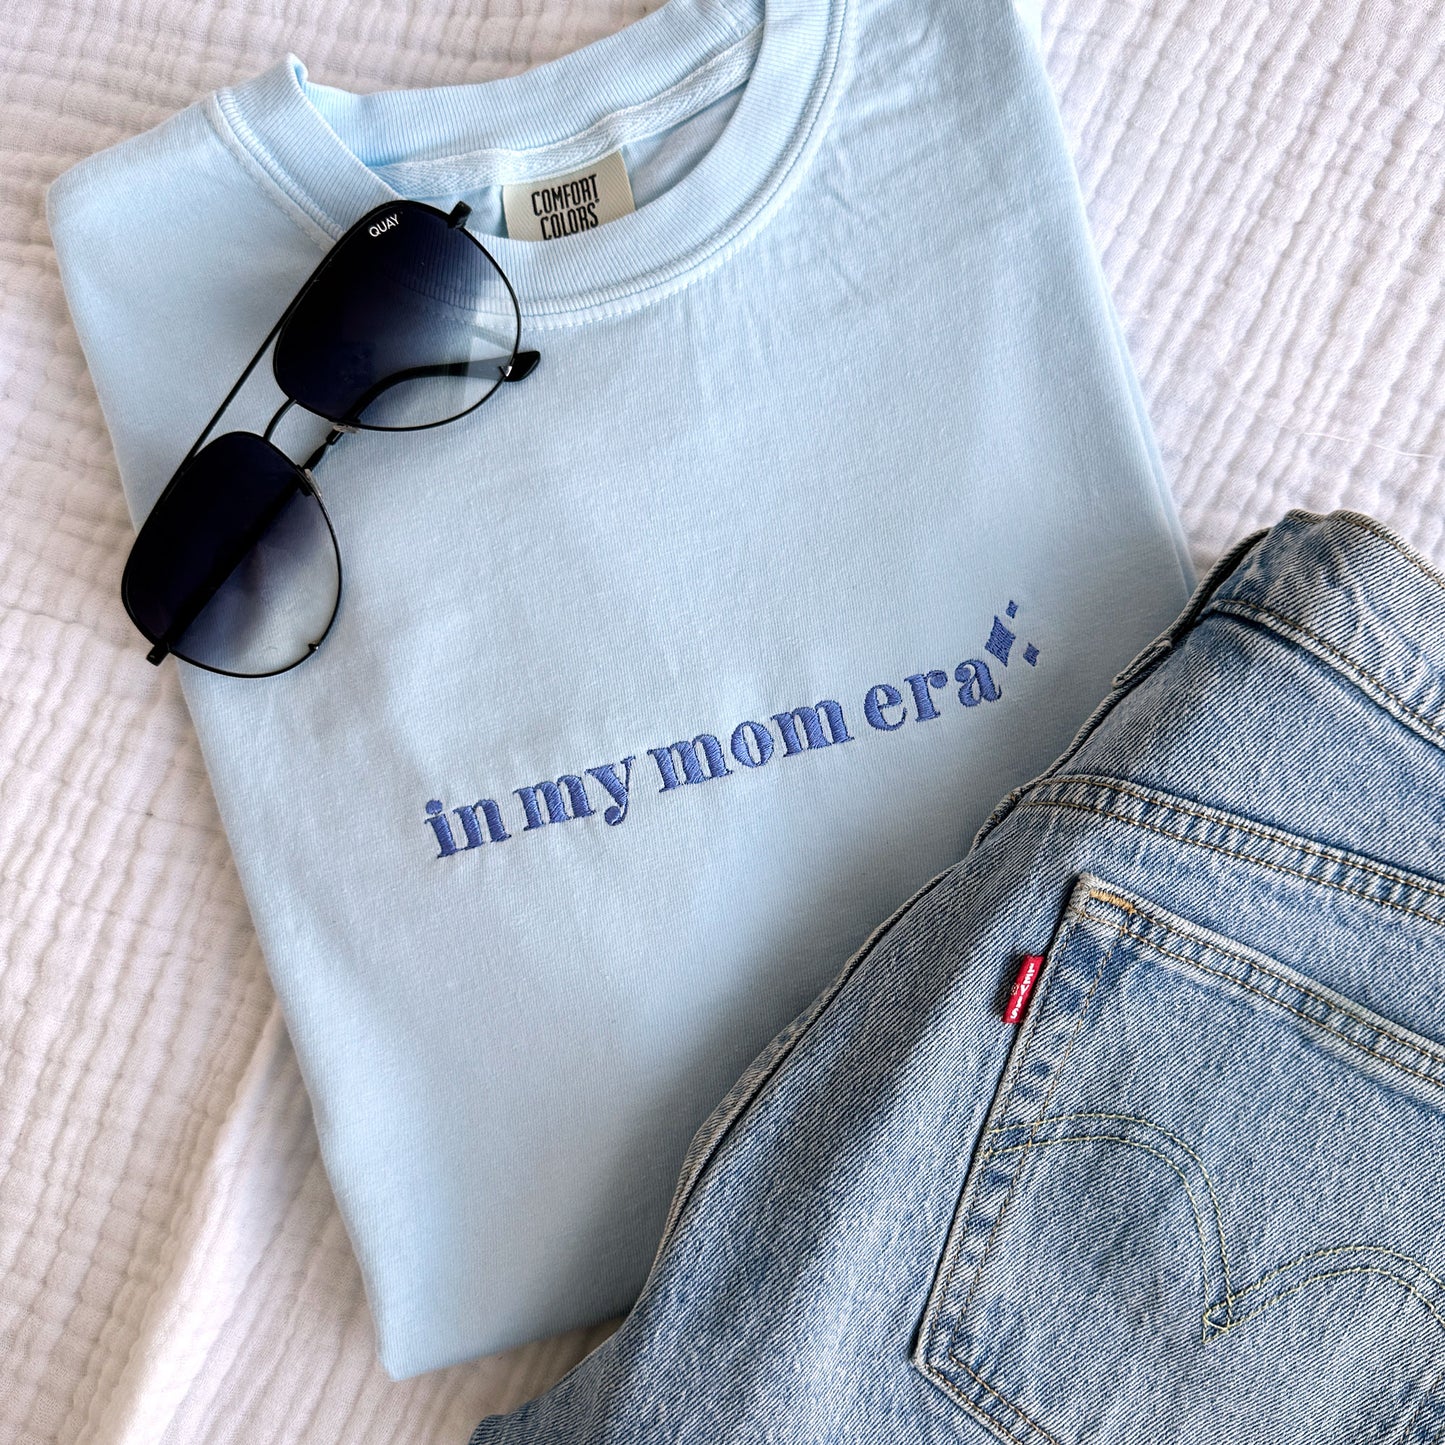 Chambray comfort colors t-shirt with embroidered in my mom era design across the chest in periwinkle thread styled with jeans and sunglasses